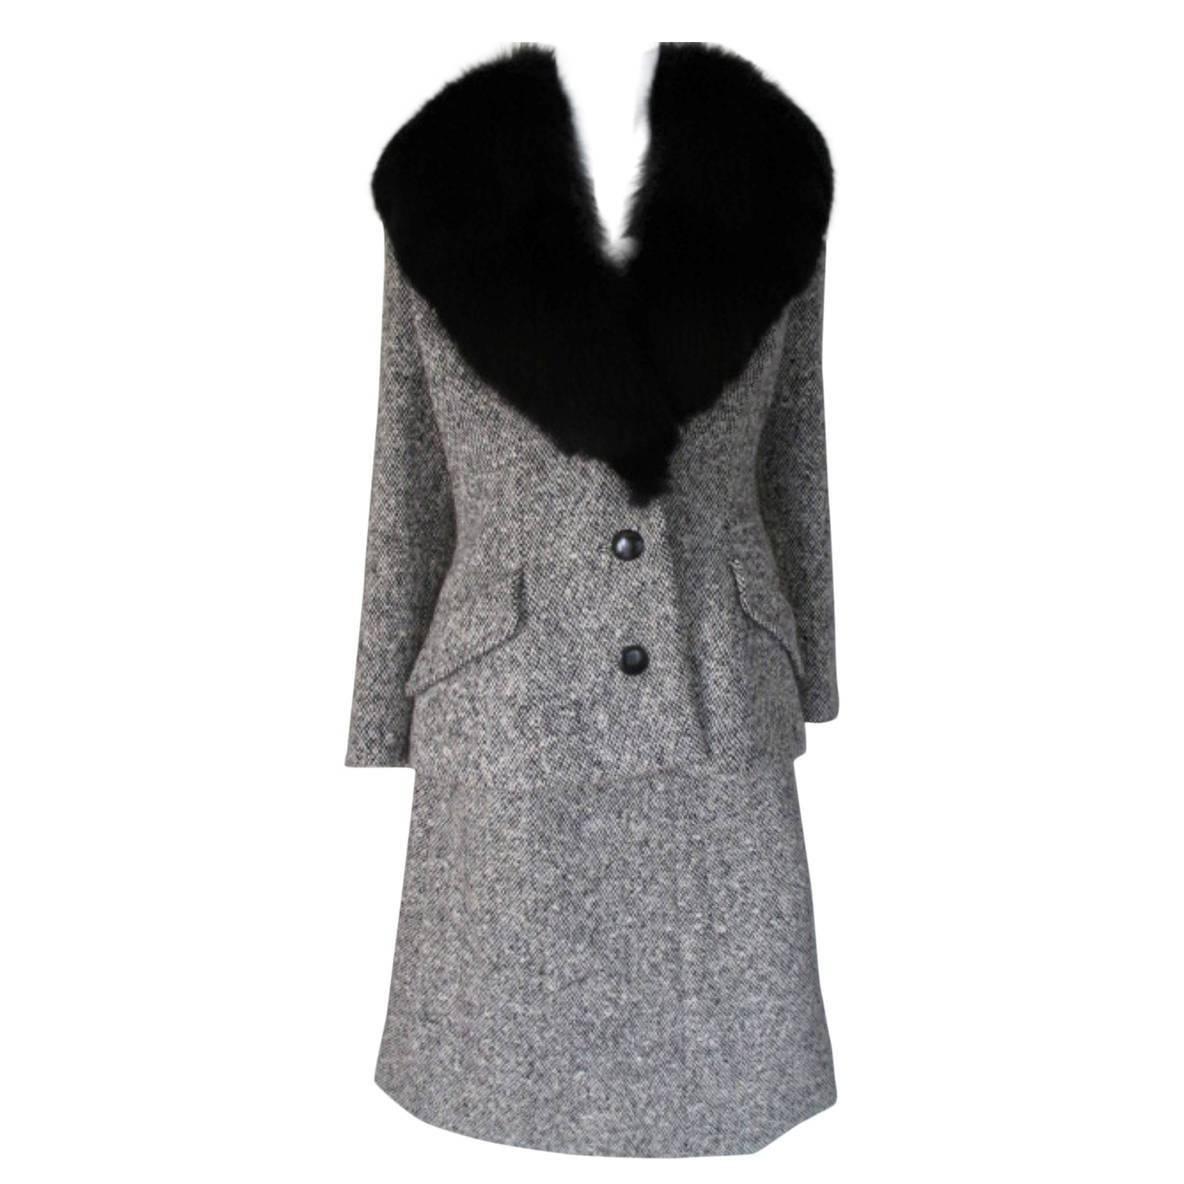 Two piece Wool Tweed Suit with Black Fox Fur Collar